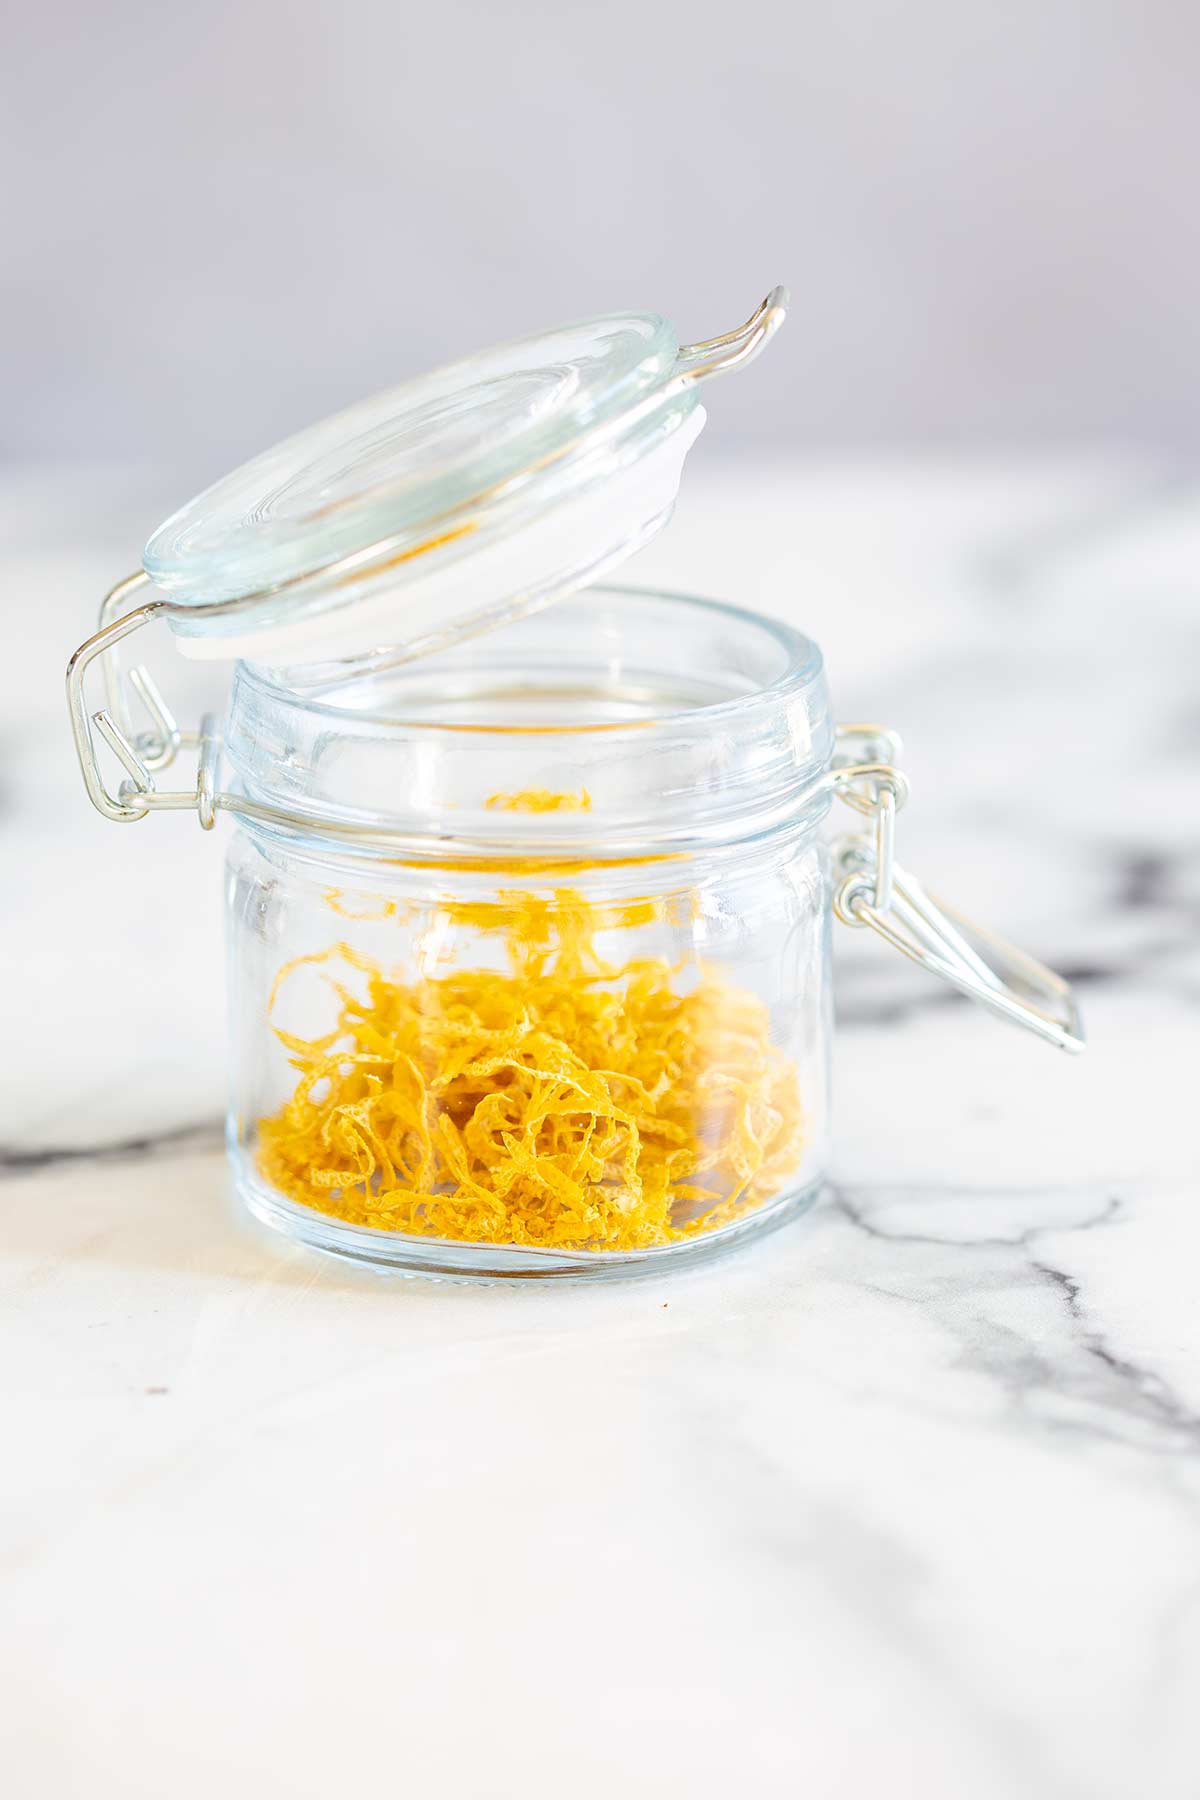 a small glass jar filled with dried lemon zest